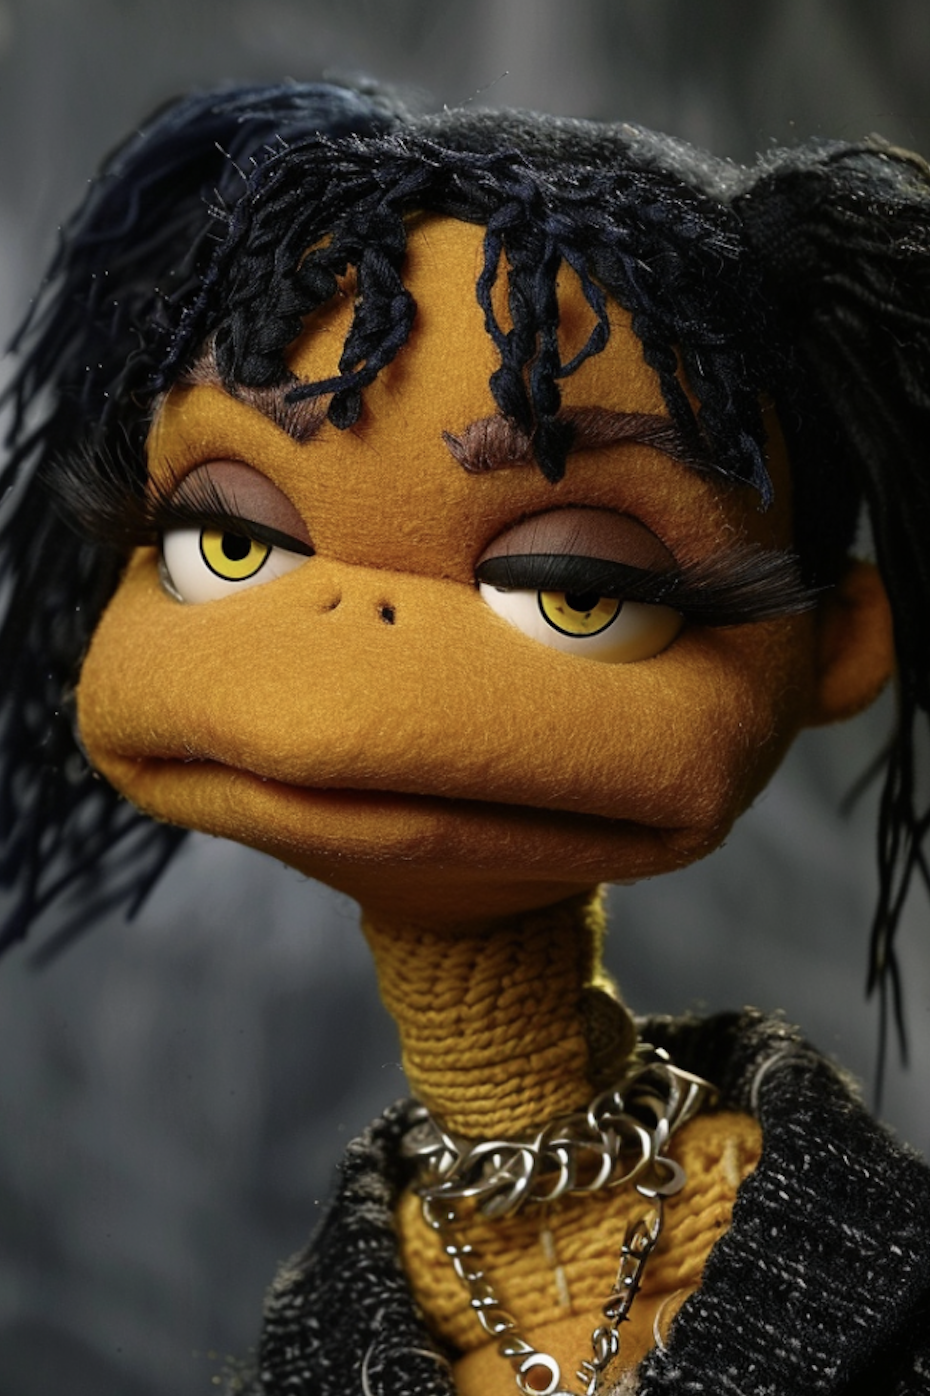 Puppet with detailed facial features and black hair, wearing a chain necklace and black jacket